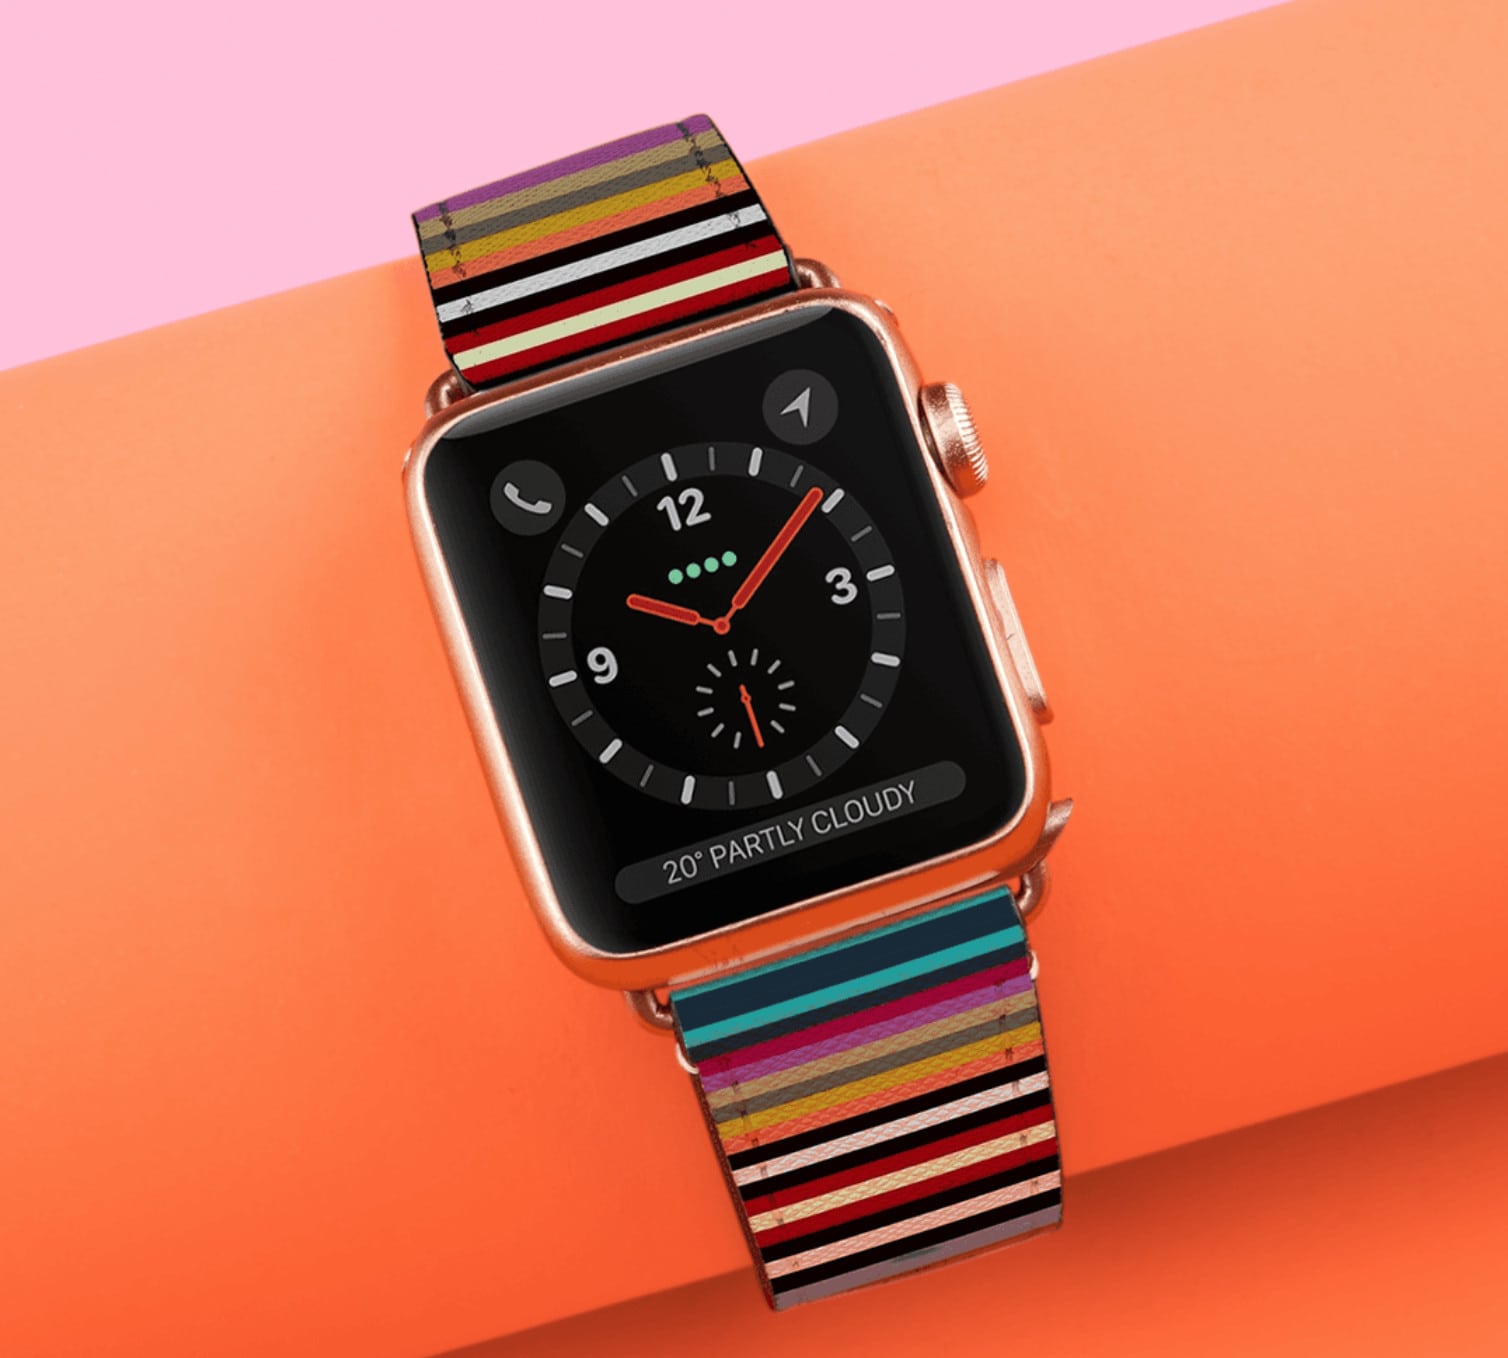 Go stripes! This saffiano leather Apple Watch band from Casetify is timeless and chic, perfect for adding flair to an everyday look.